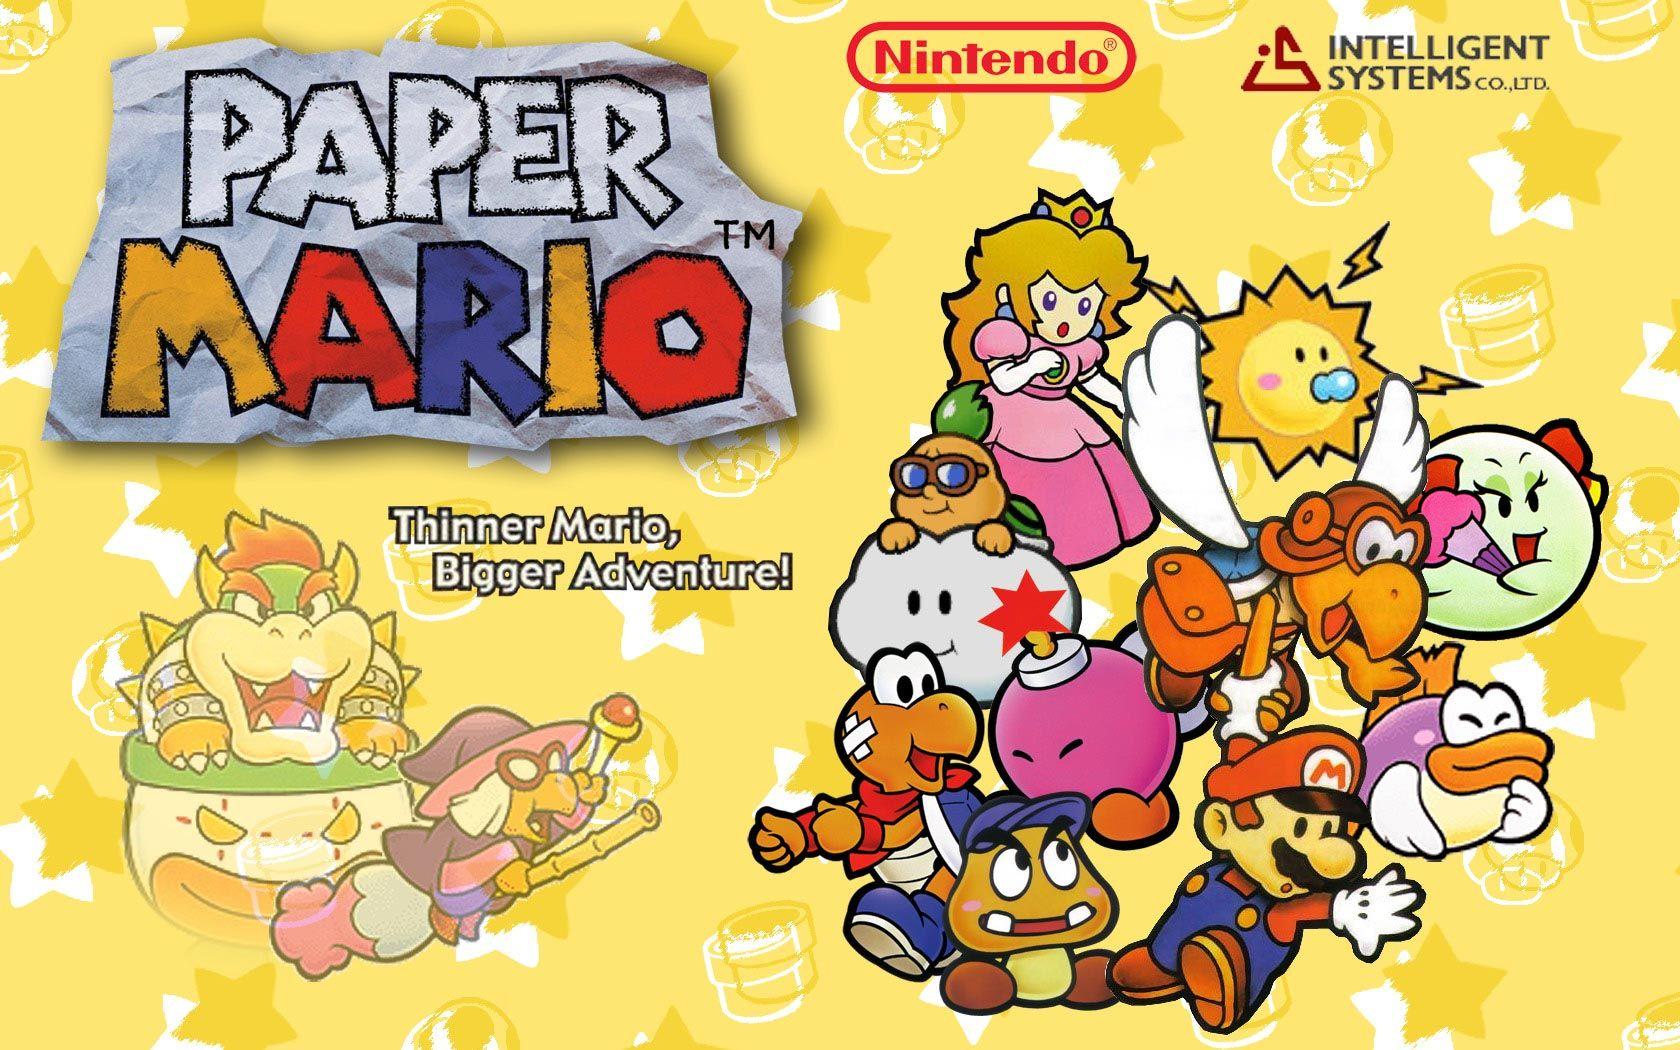 Paper Mario is coming to Nintendo Switch Online Expansion Pack on December 10th